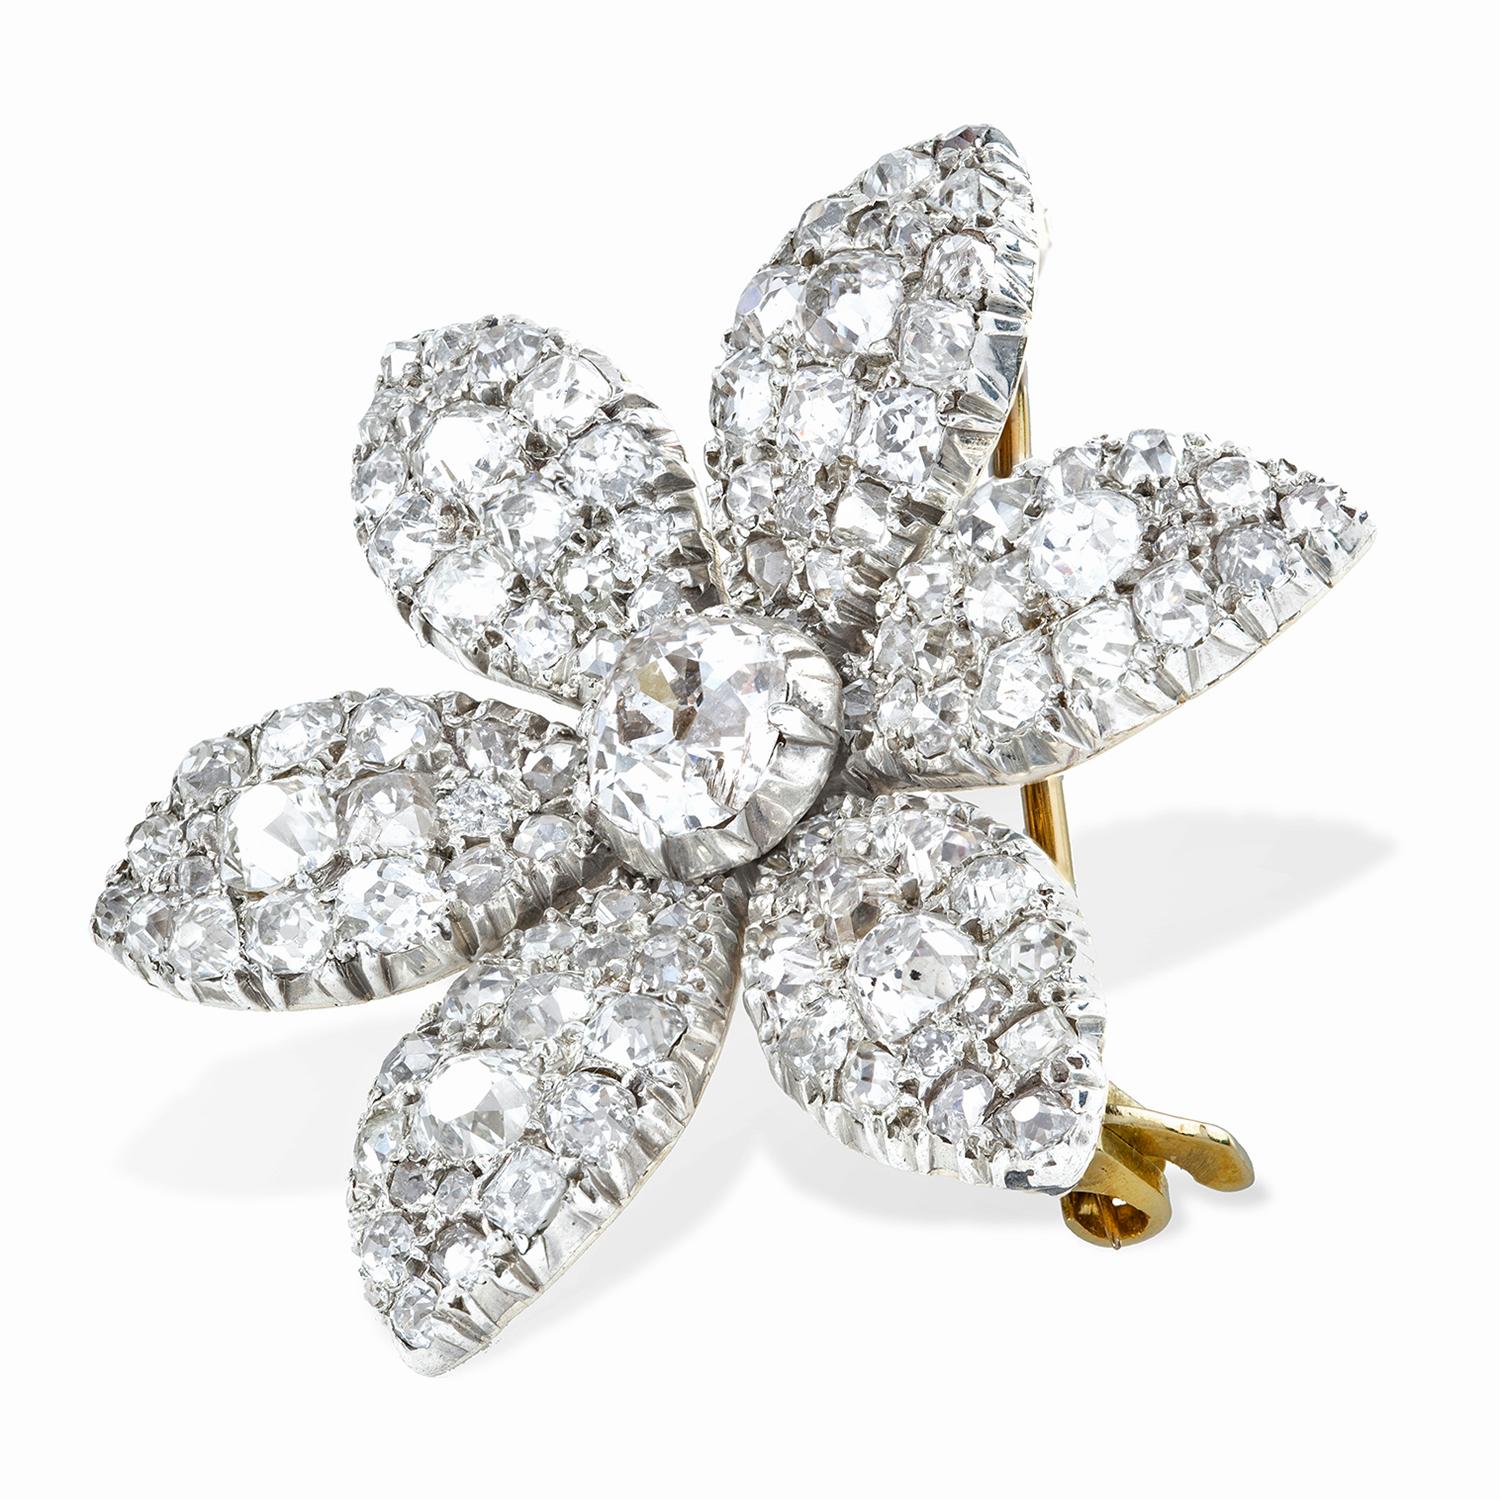 An early Victorian jasmine petal diamond brooch, the brooch in the design of a six-petalled diamond encrusted flower head with a central old brilliant-cut diamond, the diamonds estimated to weigh a total of 6.00 carats, all cut-down set in silver to